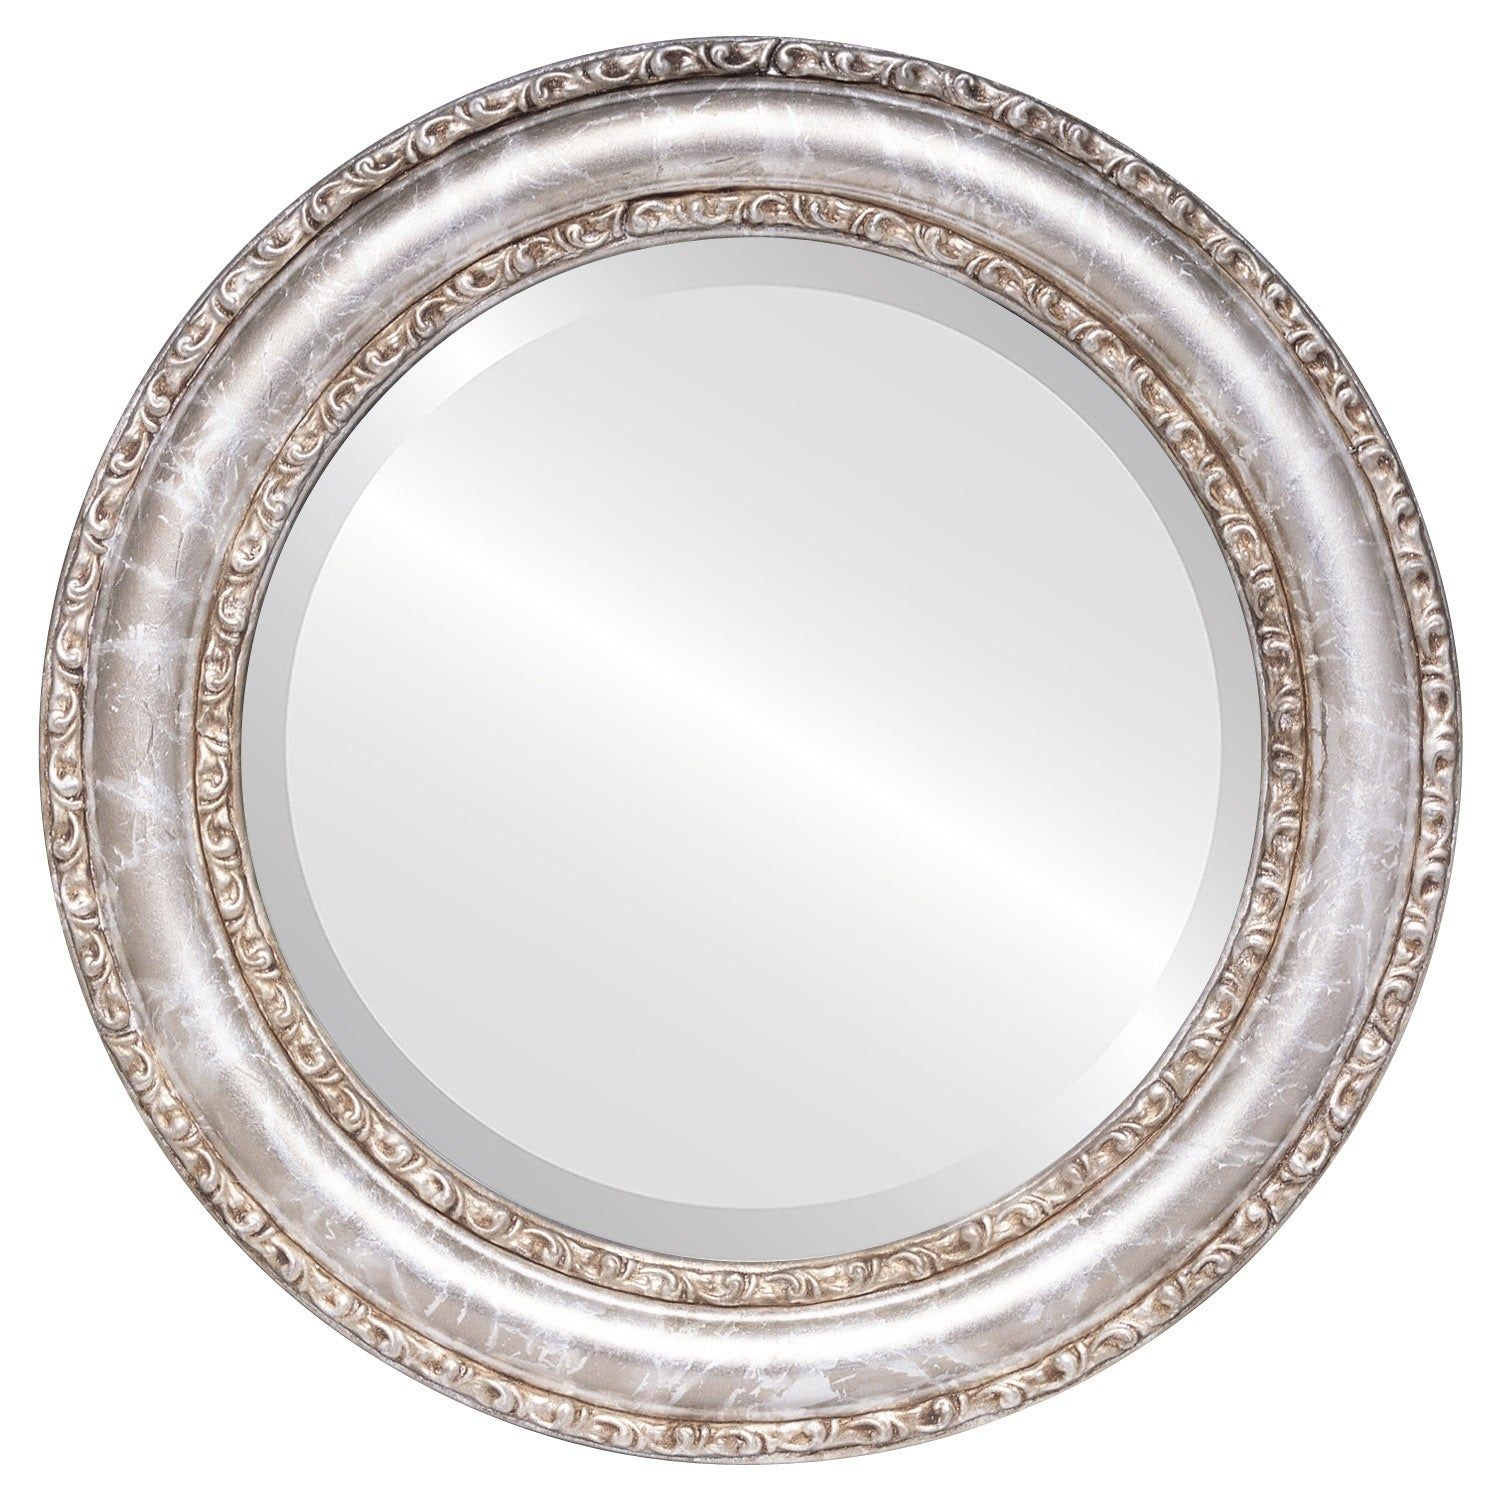 Dorset Framed Round Mirror In Champagne Silver – Antique Antique Silver With Regard To Antique Gold Leaf Round Oversized Wall Mirrors (View 7 of 15)